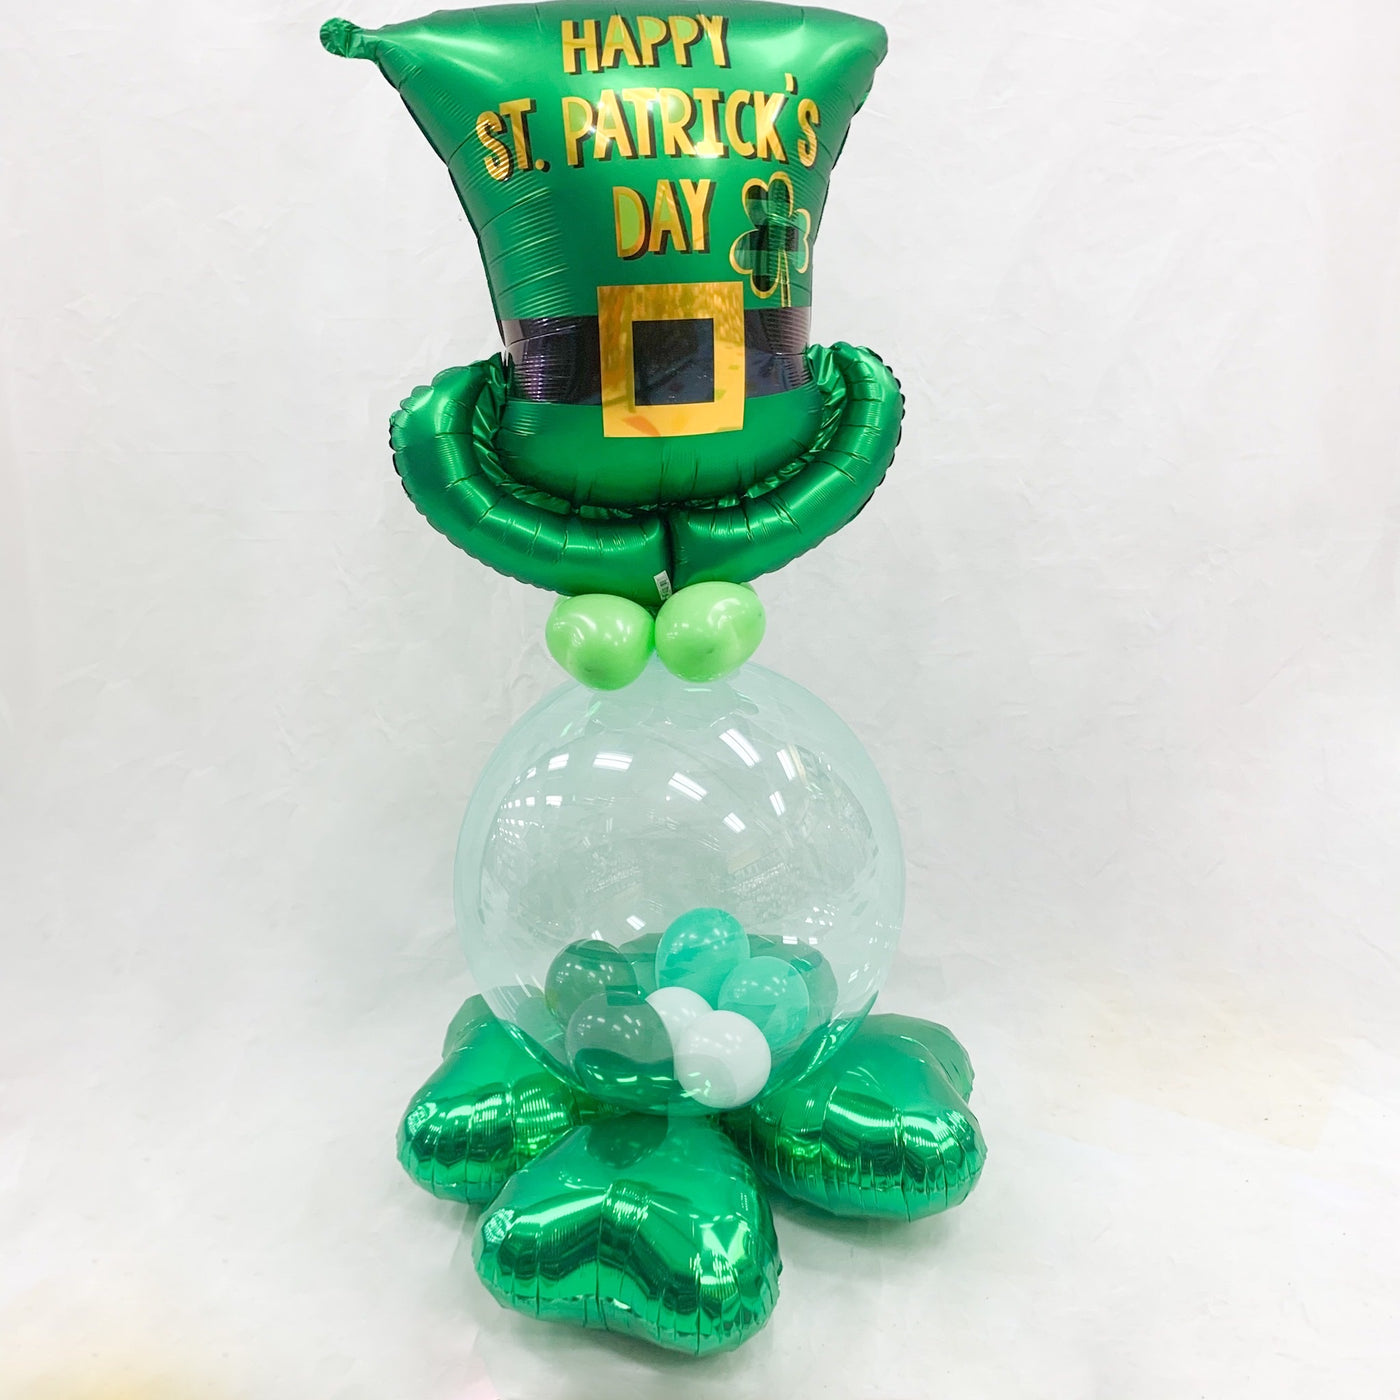 St. Patrick’s Day Gift in a balloon